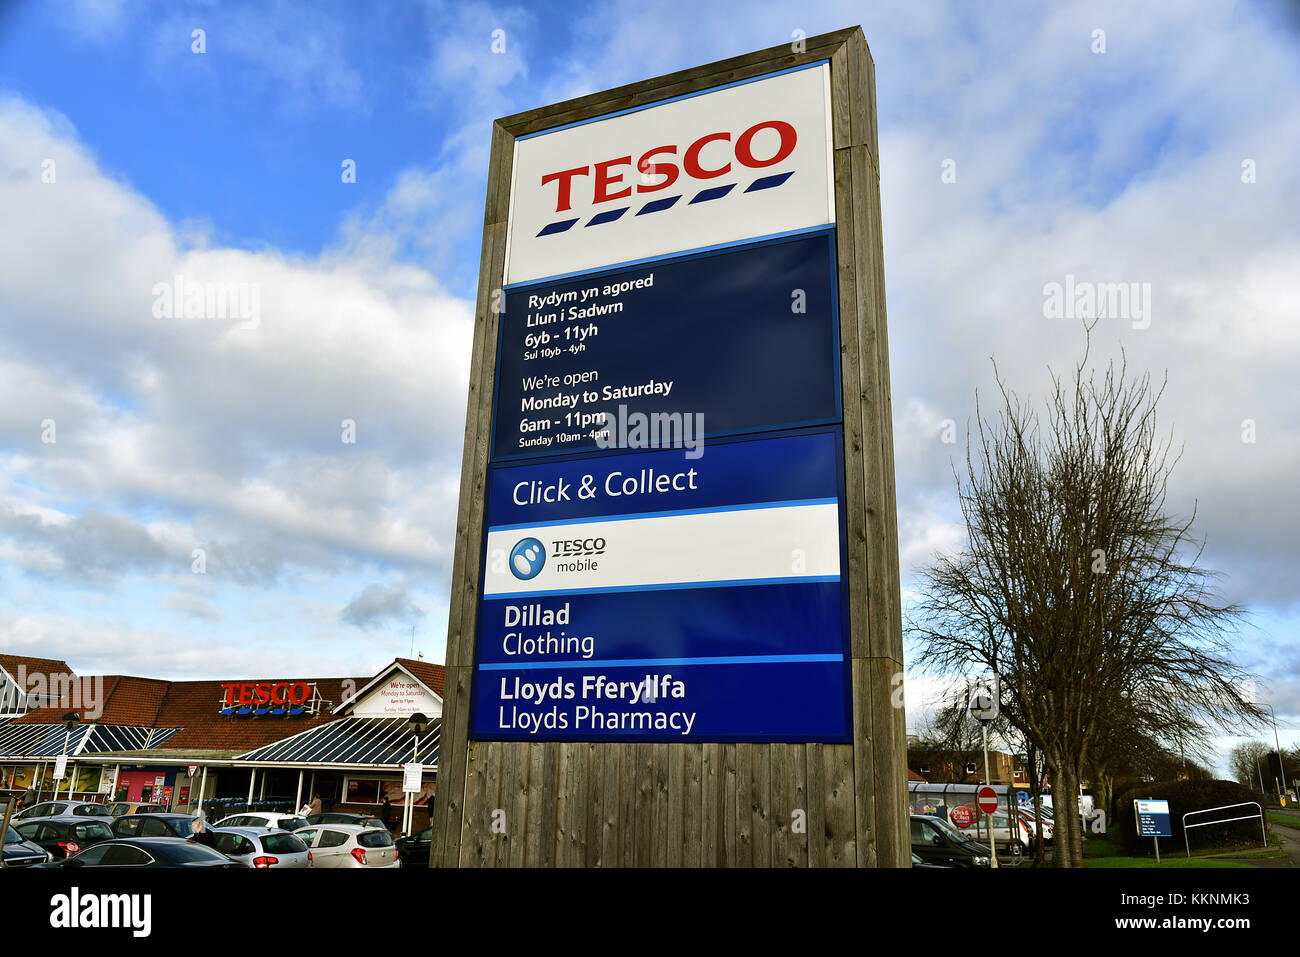 Tesco superstore, Barry, South Wales, United Kingdom Stock Photo